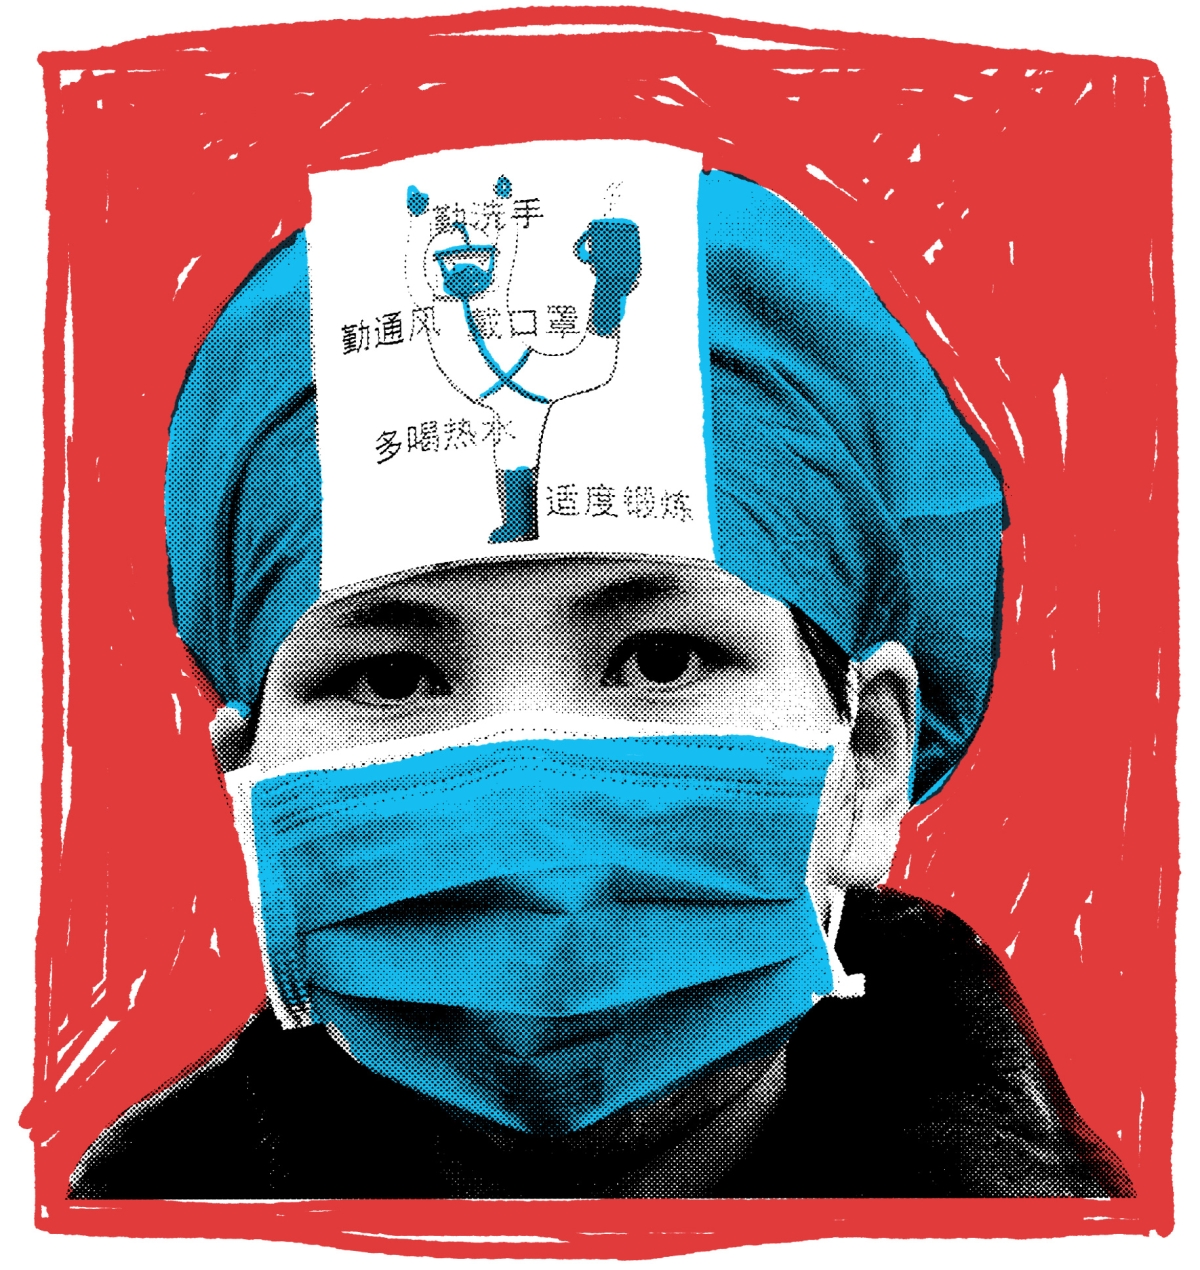 A health worker at a makeshift COVID-19 clinic at Jianghan Hospital in Wuhan, China, wears an illustration with instructions for how to avoid catching the virus on March 9, 2020.